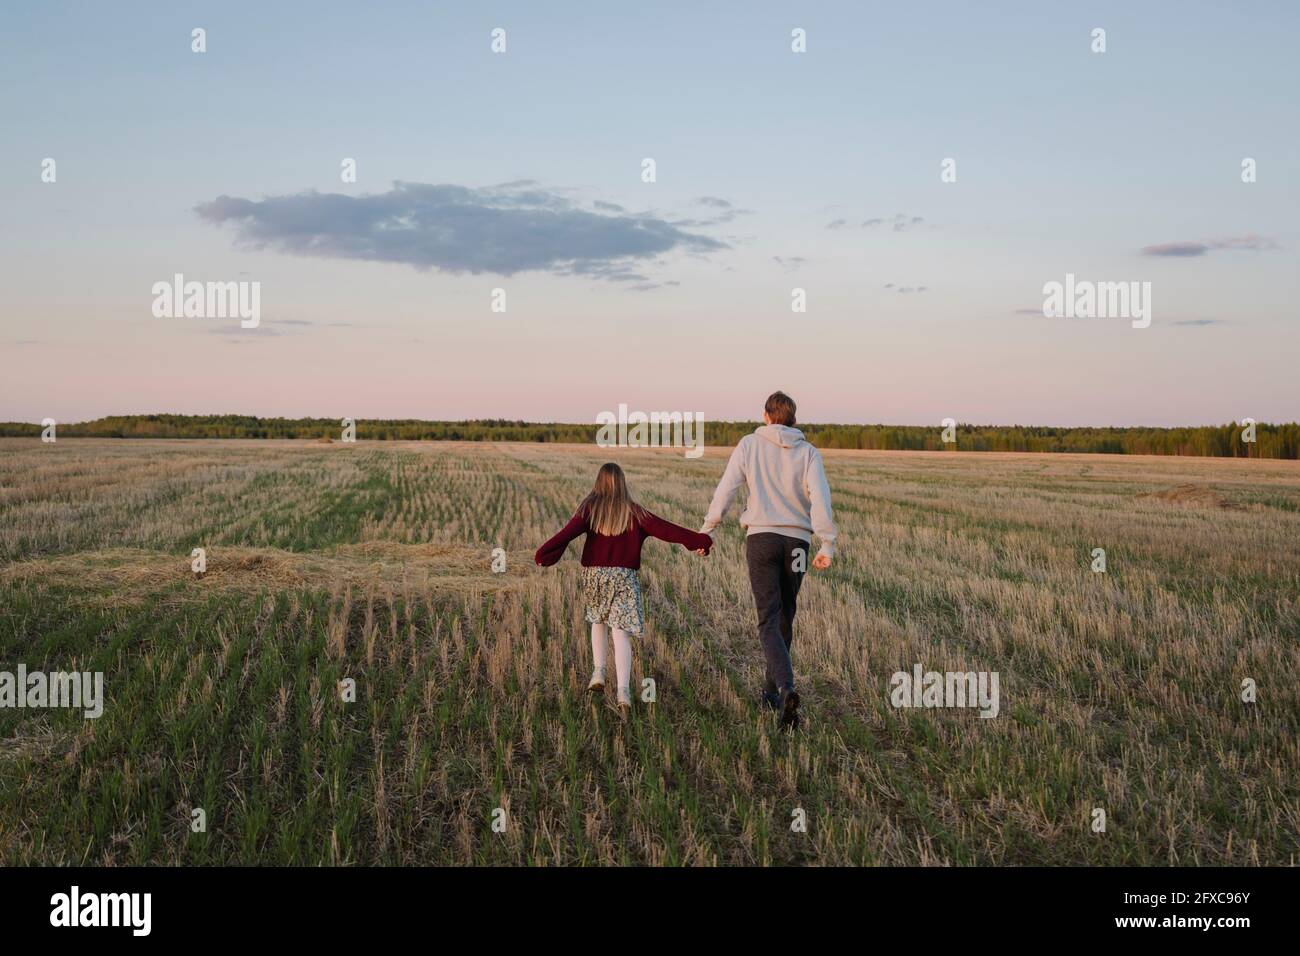 Father and daughter walking in field Stock Photo